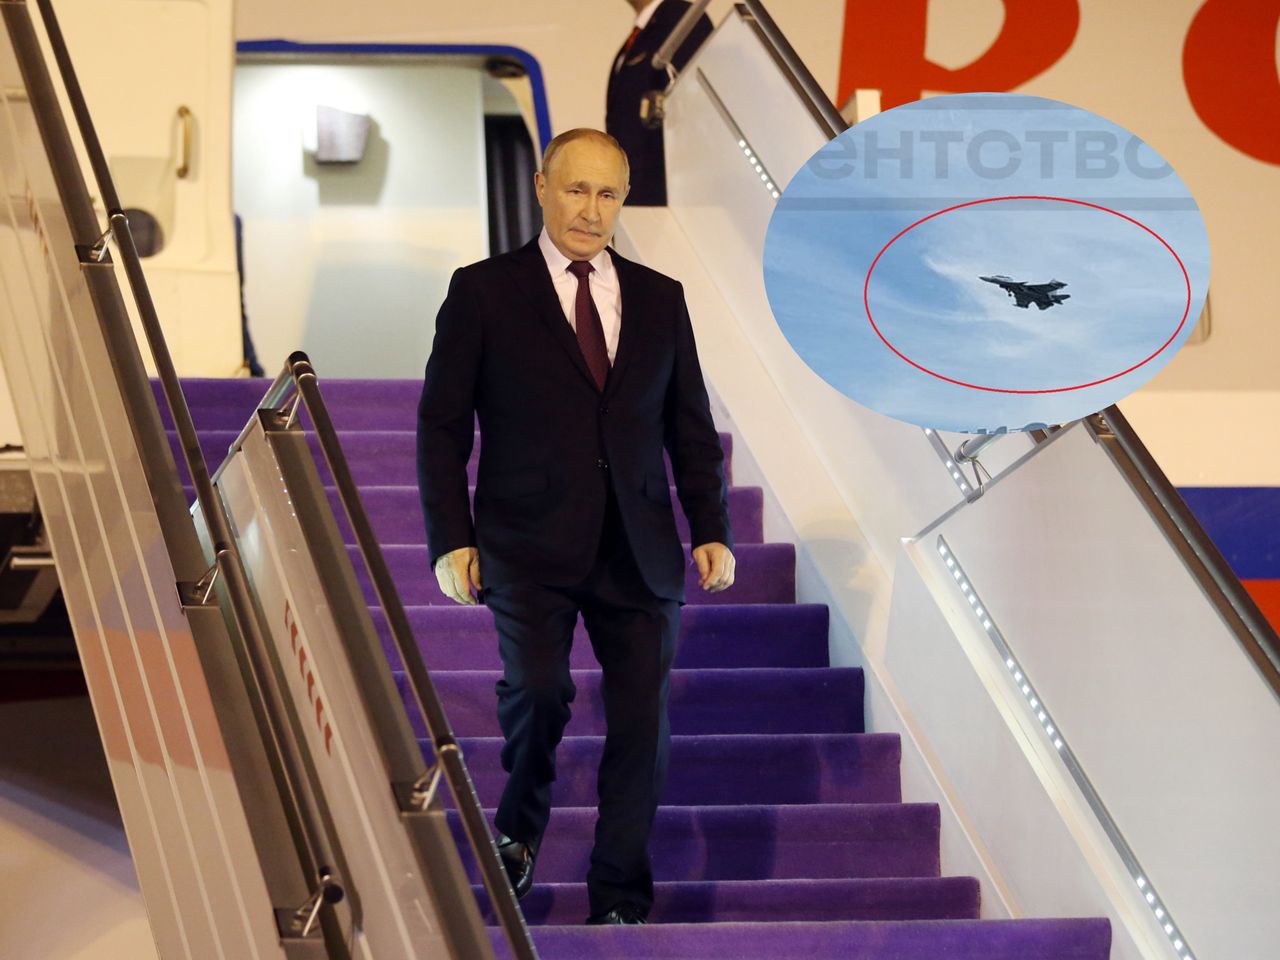 Putin flies with fighter jets: Fear or heightened security measures?